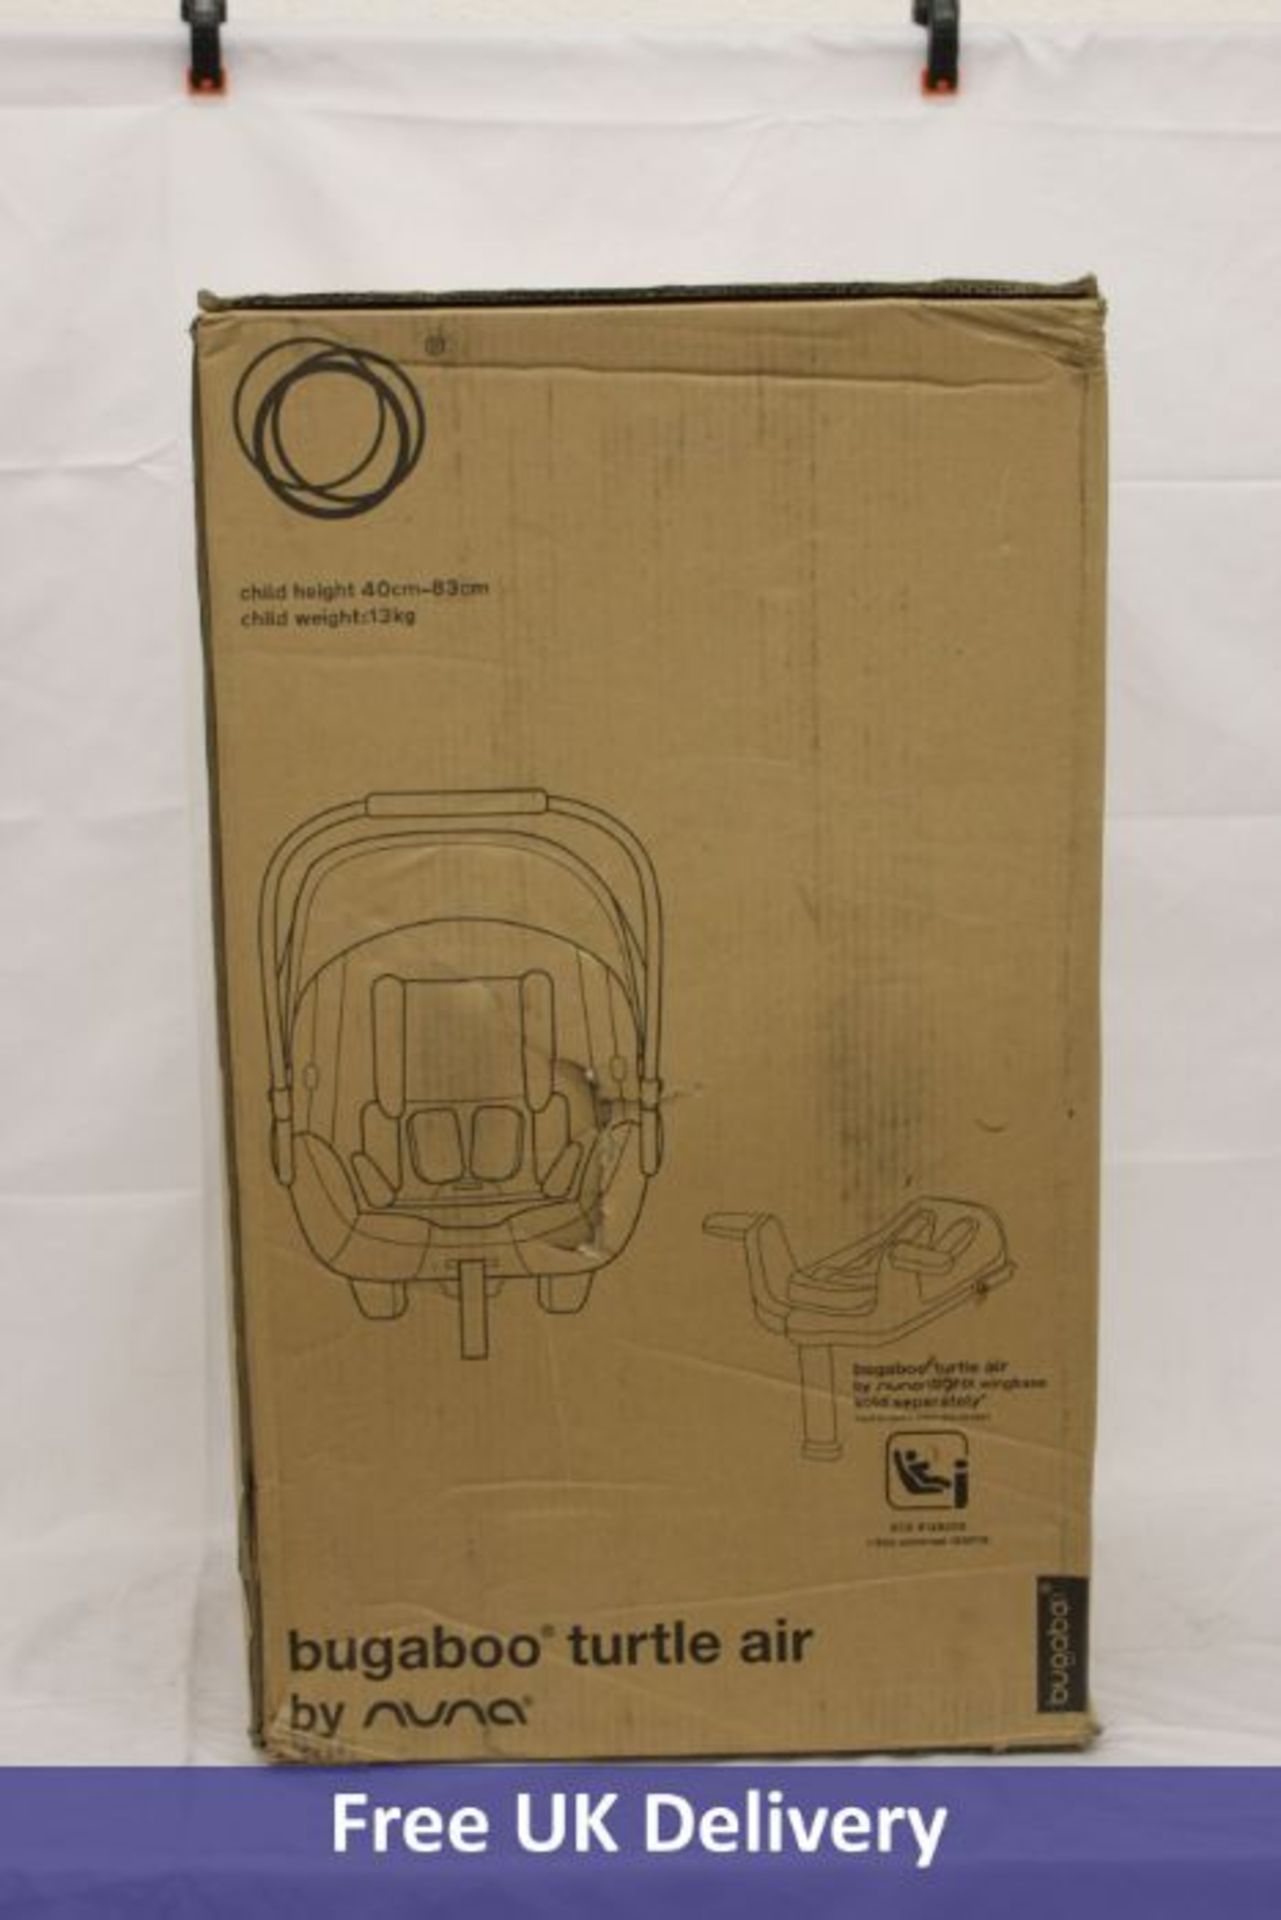 Bugaboo Turtle Air Car Seat, Child Height 40cm-83cm, Child Weight 13kg